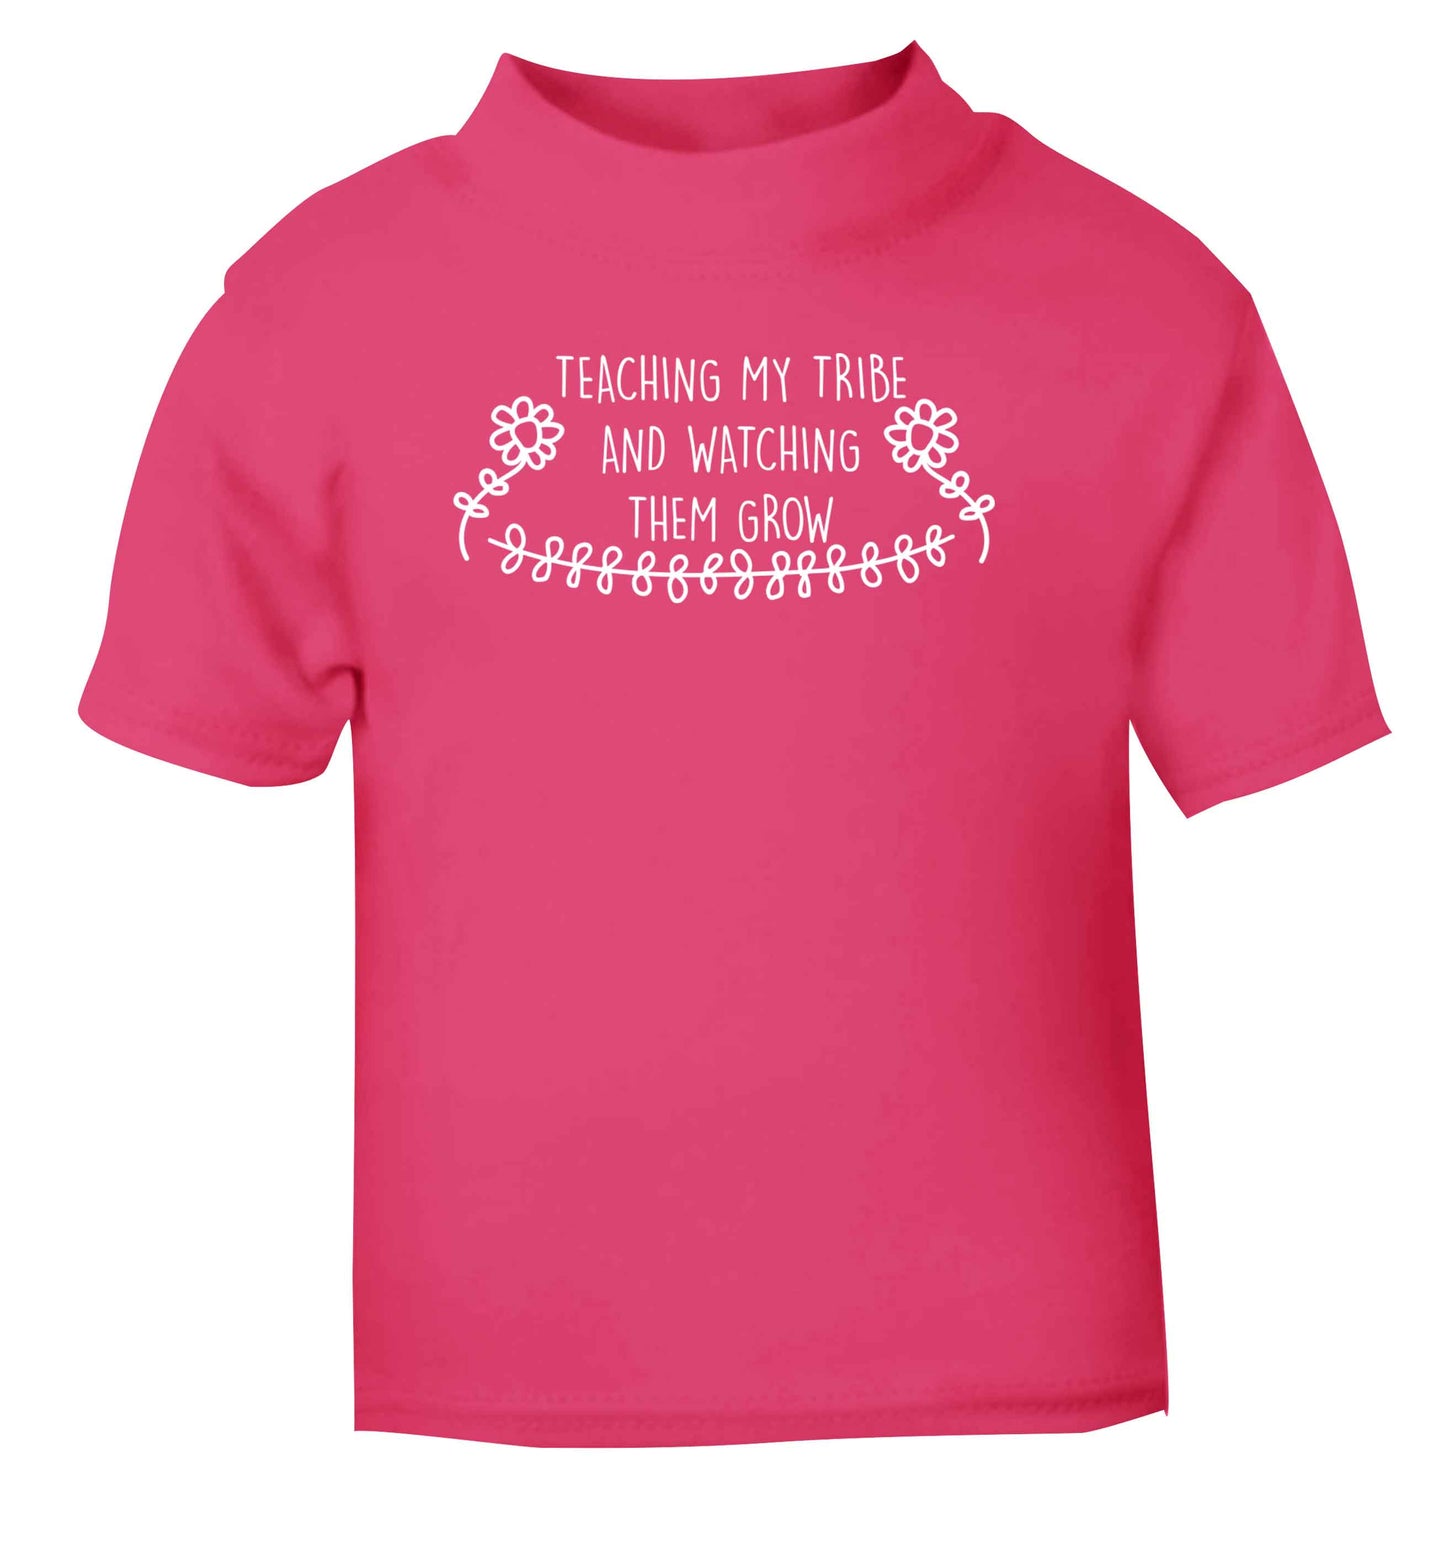 Teaching my tribe and watching them grow pink Baby Toddler Tshirt 2 Years